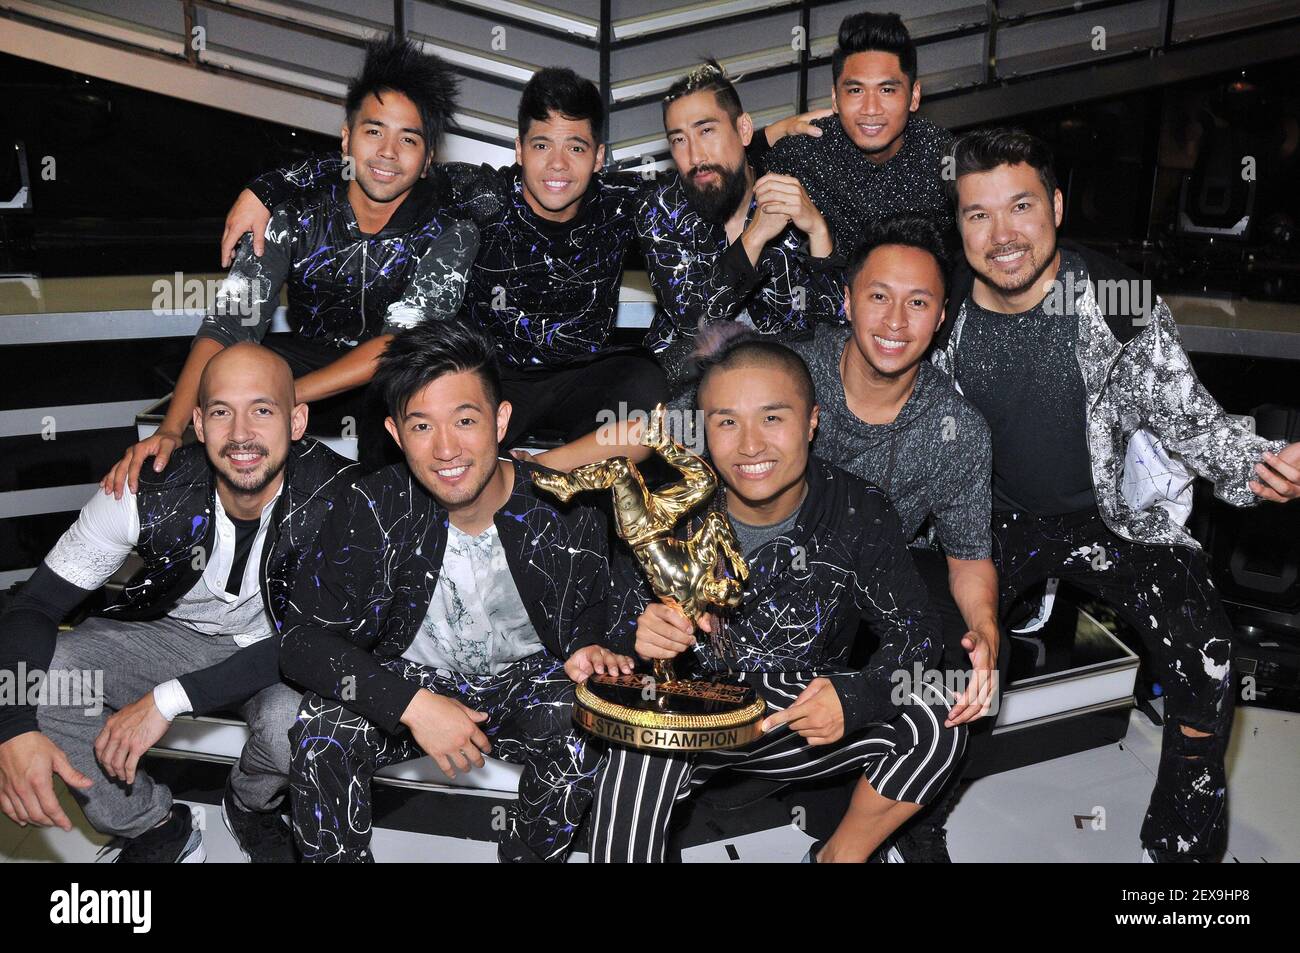 America's Best Dance Crew All Star Champion, Quest Crew - (L-R Top) Ryanimay Conferido, Dominic 'D-Trix' Sandoval, Ryan Feng, RU (L-R Bottom) Jolee Lee, Steve Terada, Hok Konishi, Aris Paracuelles & Brian Hirano at the 'America's Best Dance Crew: Road To The VMA's' Finale held at the Warner Bros Lot Stage 19 in Burbank, CA on Saturday, August 29, 2015. (Photo By Sthanlee B. Mirador) *** Please Use Credit from Credit Field *** Stock Photo